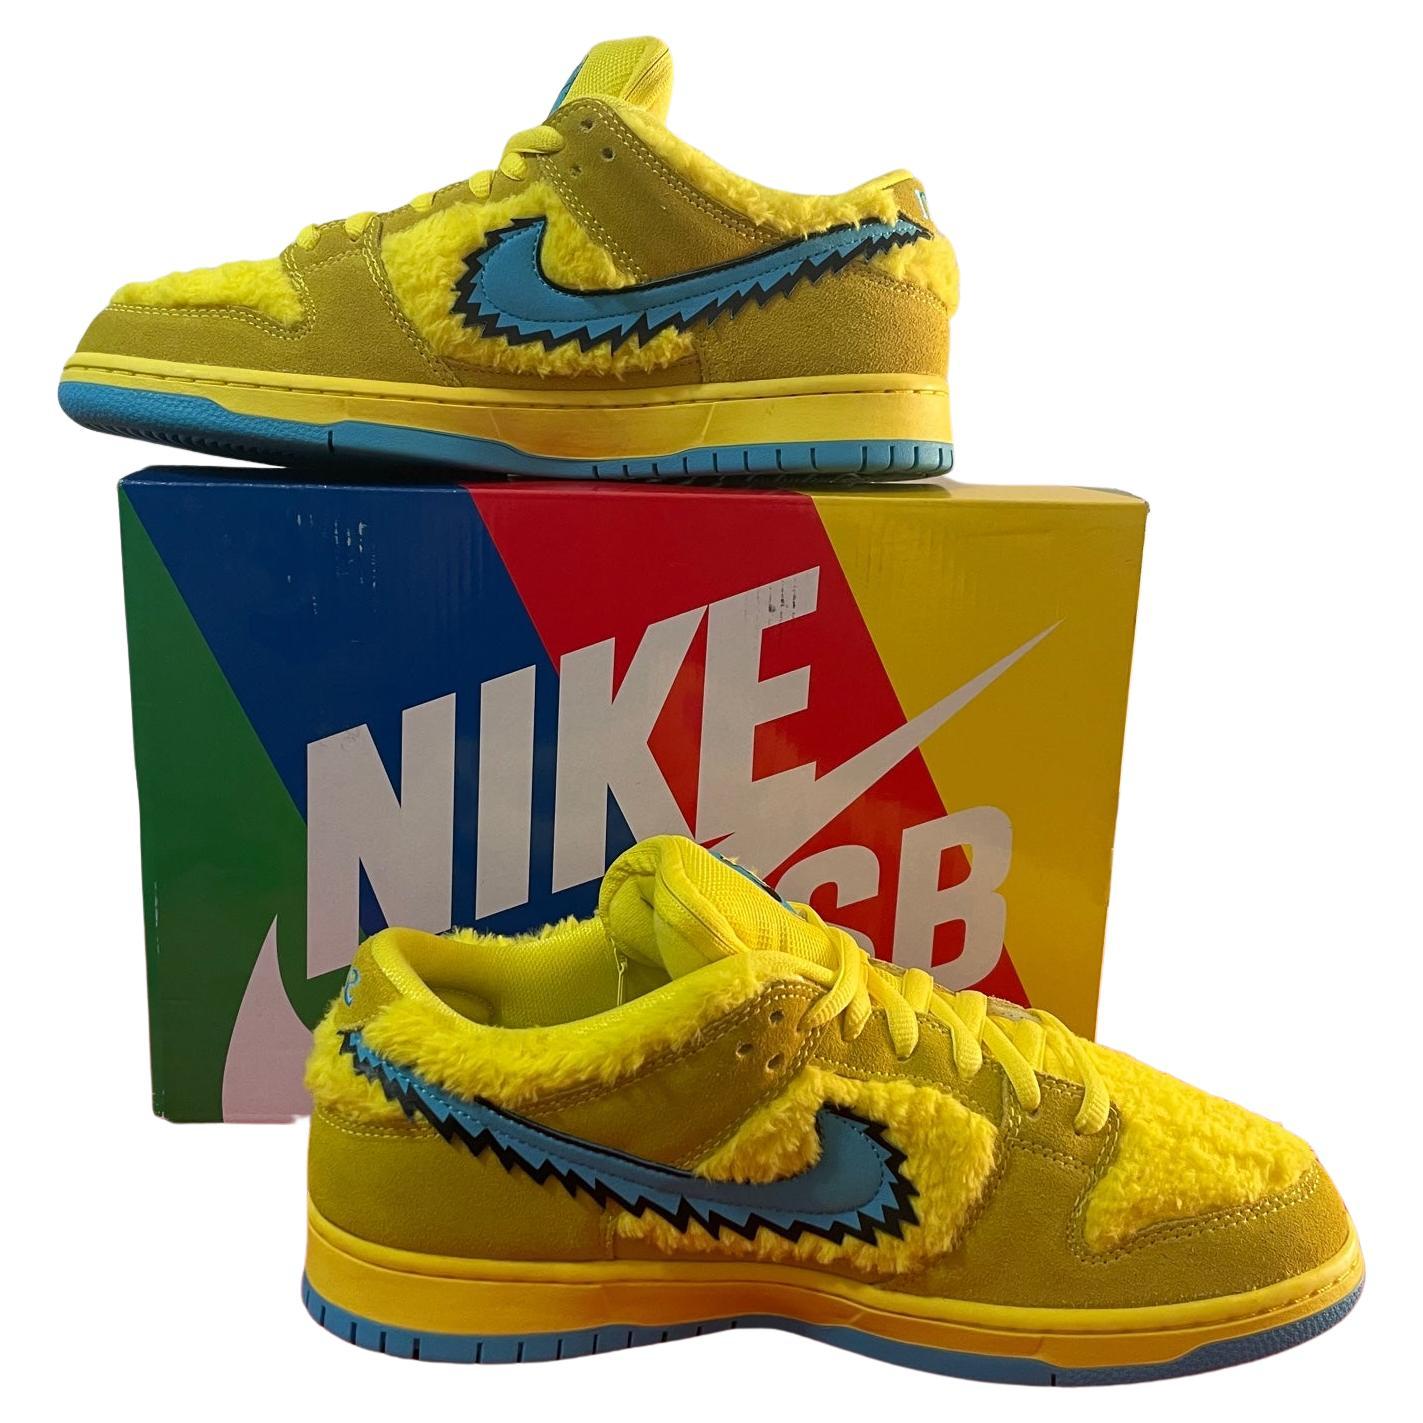 The Dunk SB Low Grateful Dead Bears Opti Yellow shoes are a reissue of the famous original skateboard shoes from the 1990s. Made with a yellow suede upper and retro-style fur detailing , they also feature non-slip non-slip rubber inserts for